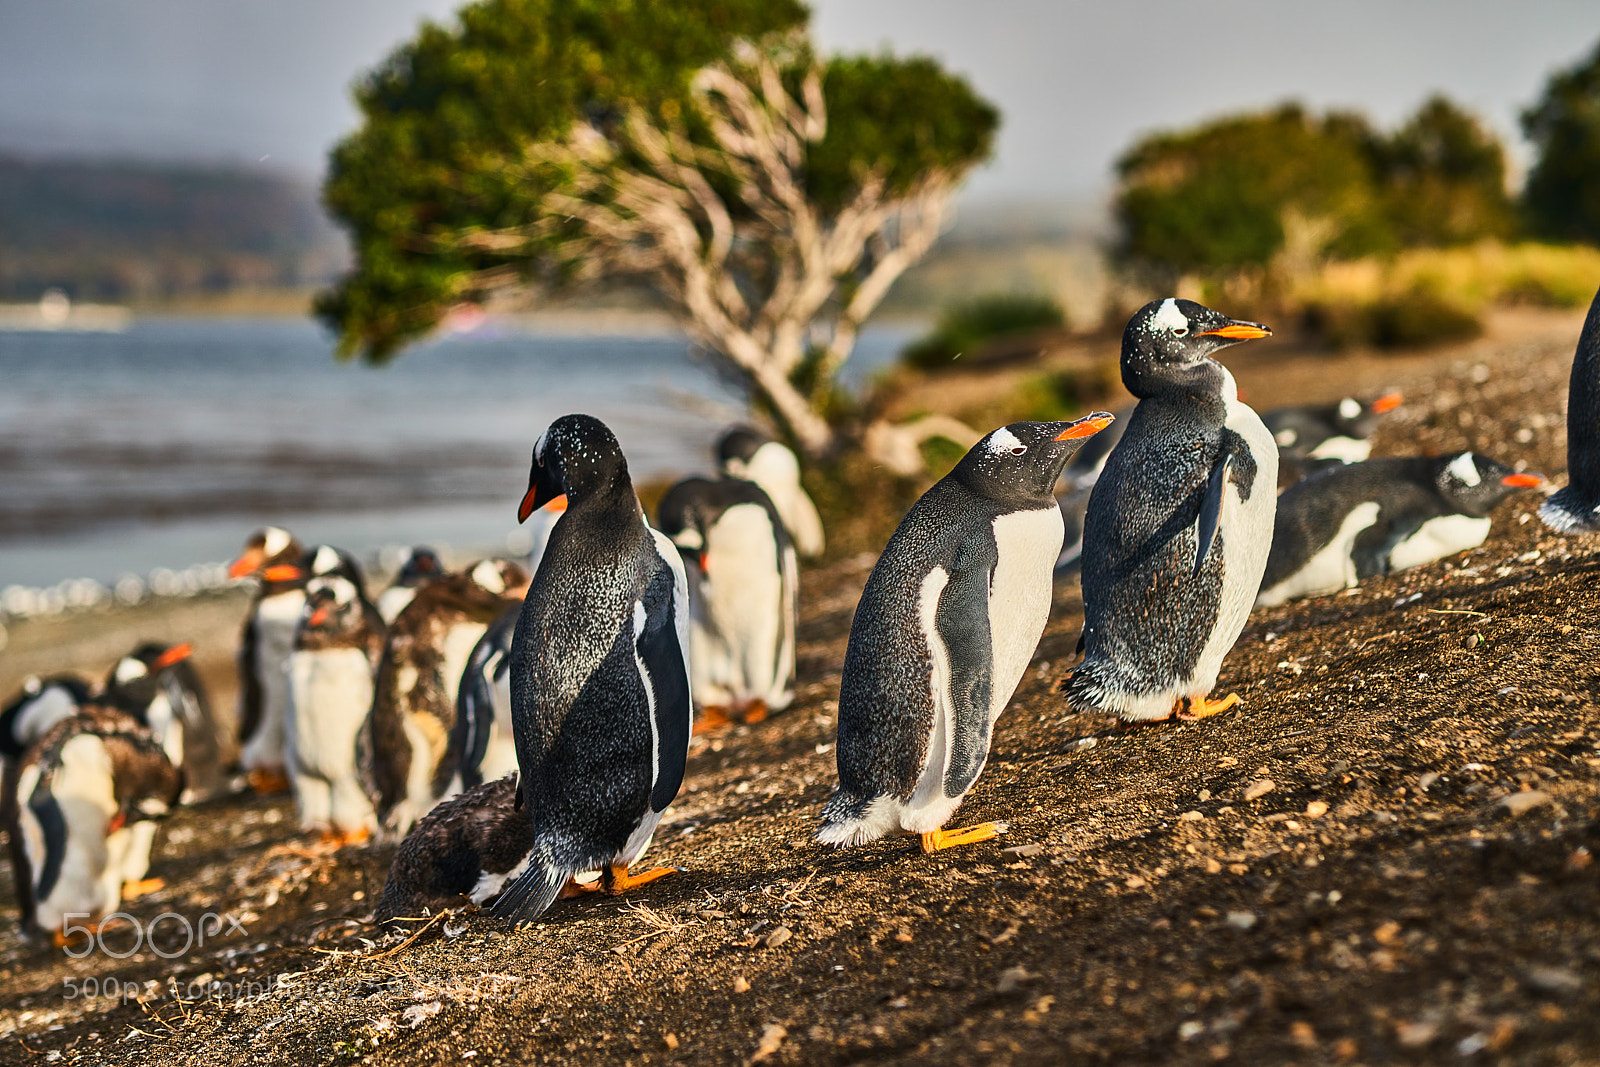 Sony a99 II sample photo. The colony of penguins photography